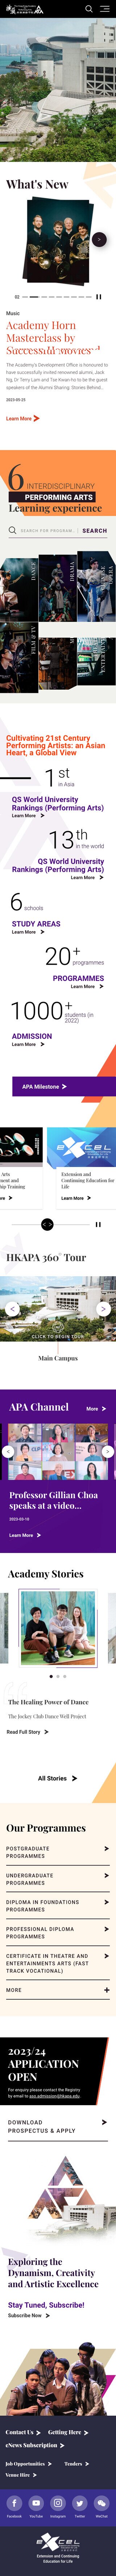 Hong Kong Academy for Performing Arts website screenshot for mobile version 1 of 5